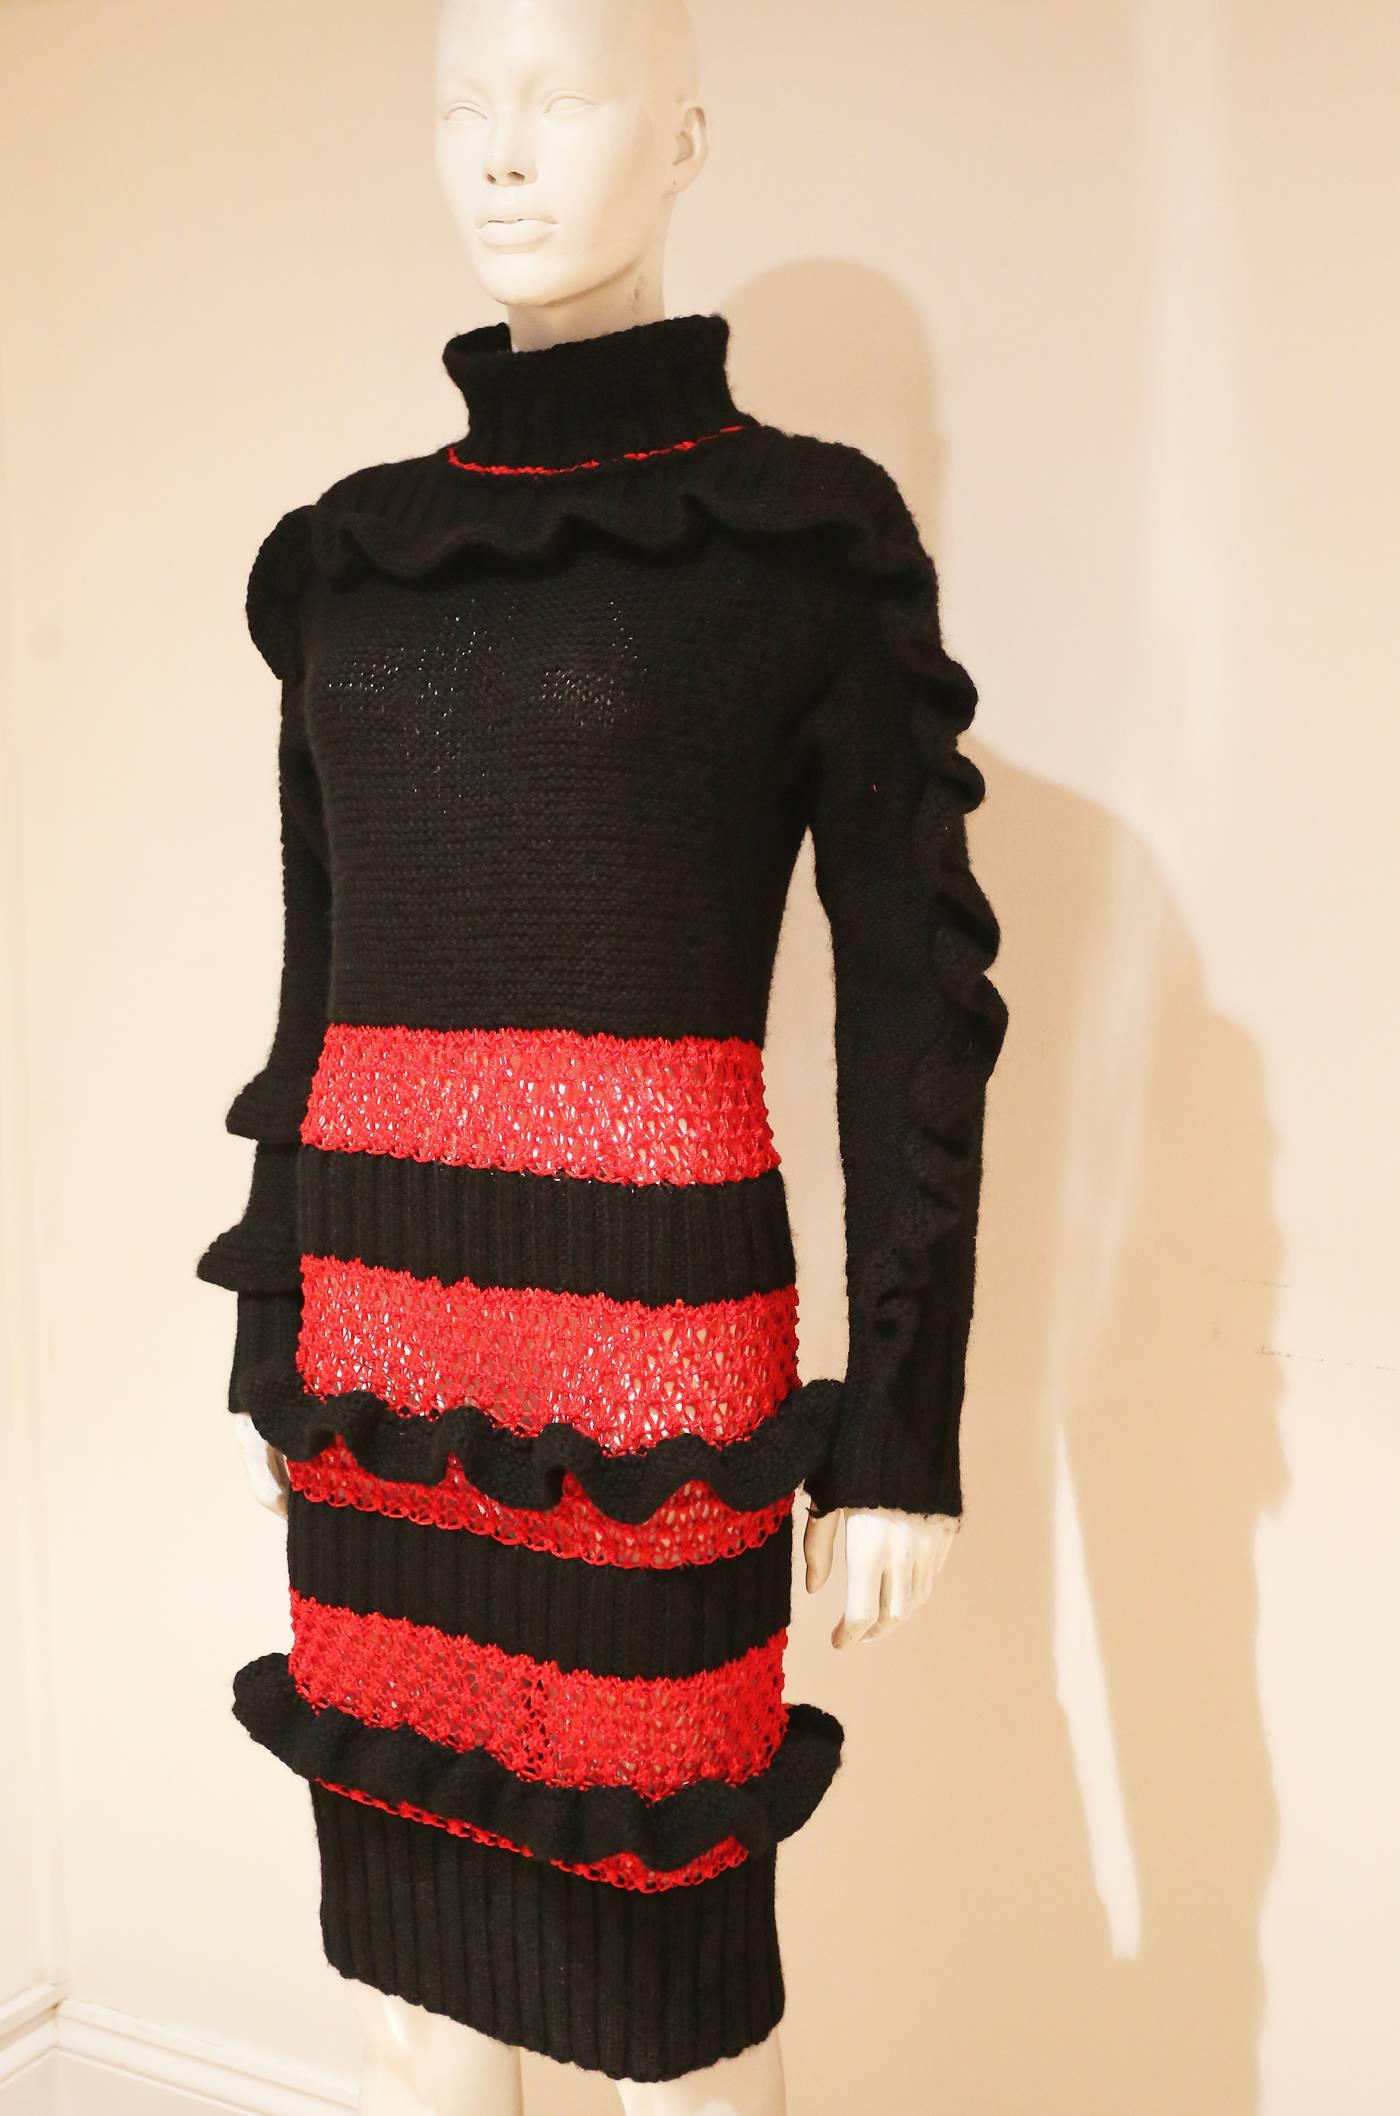  A knitted dress designed by Bodymap. The designers Stevie Stuart and David Holah formed the company, which had a reputation during the 1980s for producing innovative layered clothing.

This dress is hand-knitted from black cotton, with ribbing at